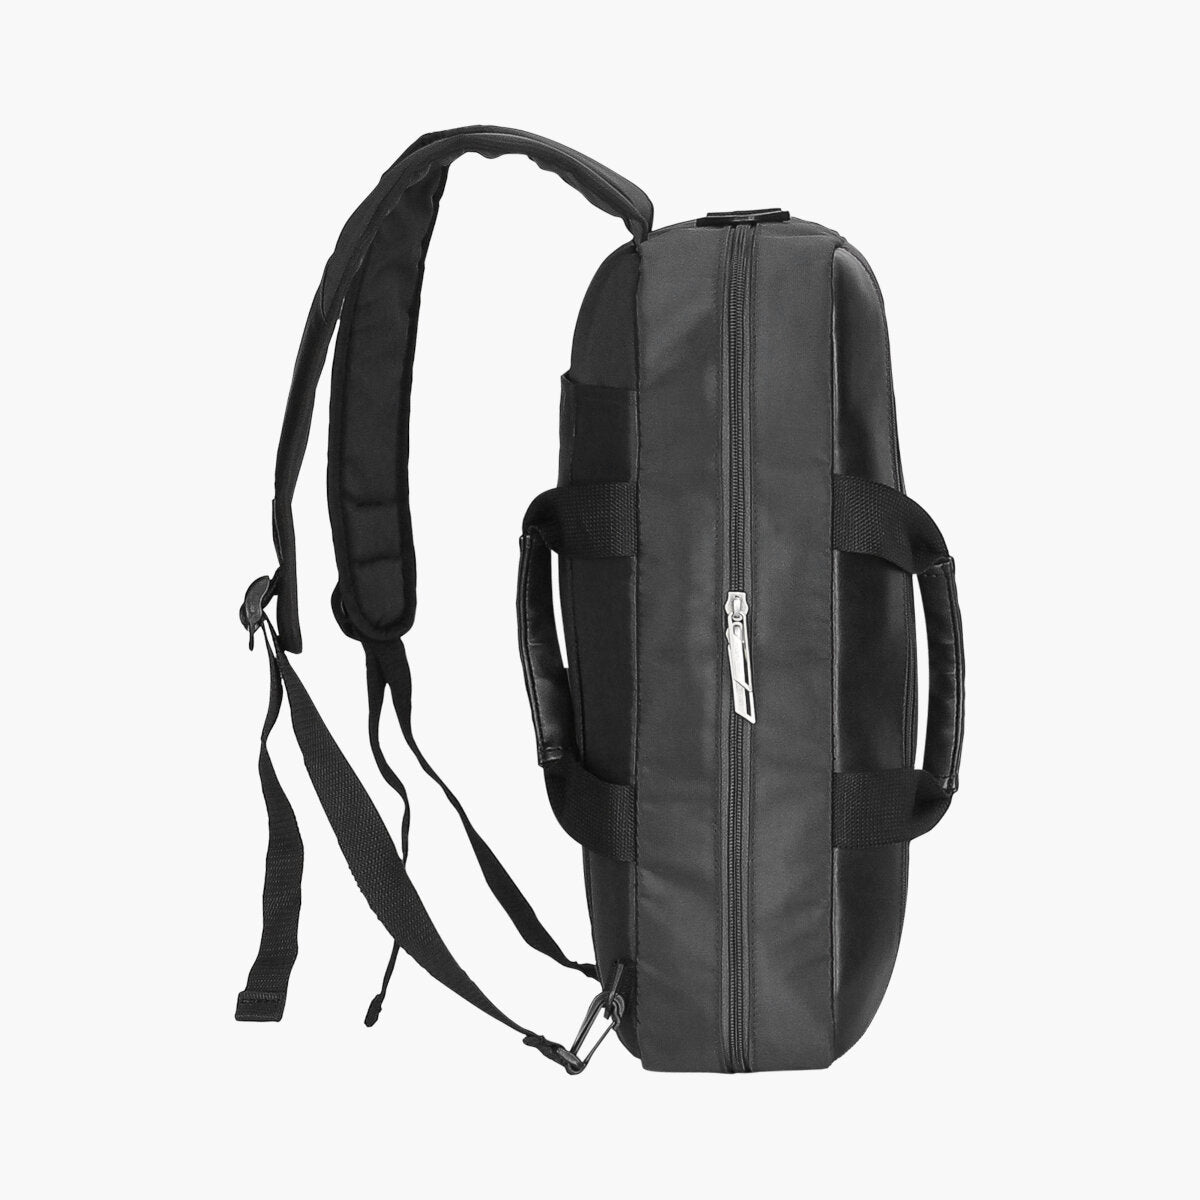 Black | Protecta The Underdog Convertible Briefcase Backpack - 5